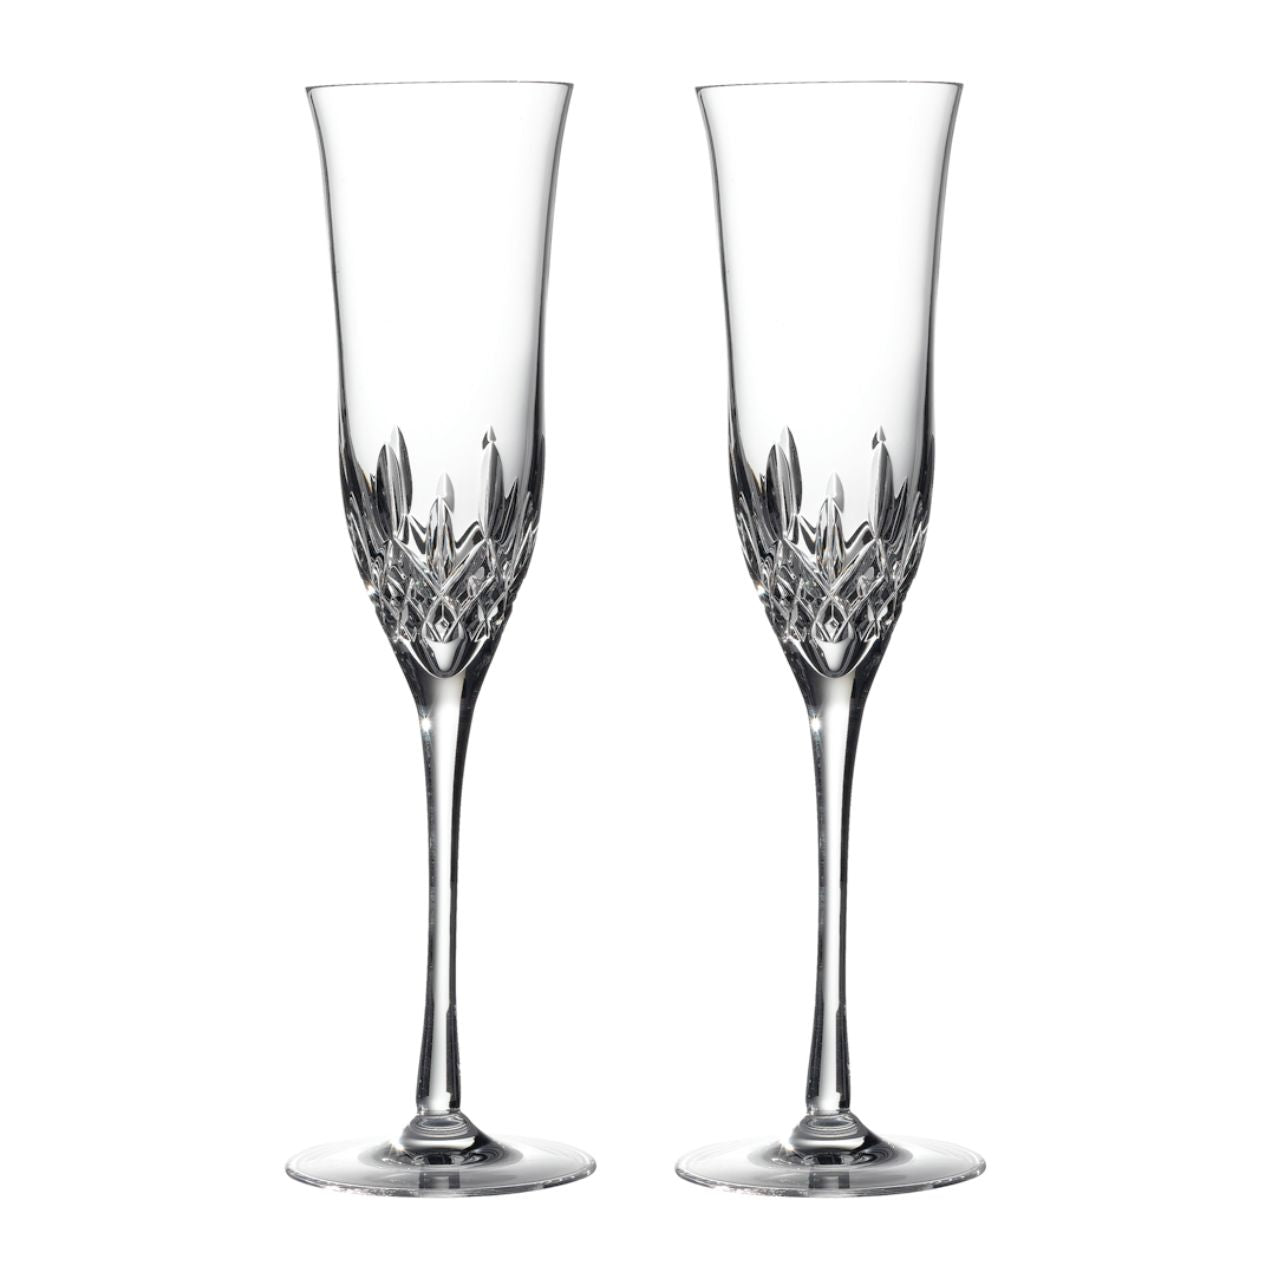 Lismore Essence Champagne Flute Pair by Waterford Crystal  Bring sheer excellence to your celebrations with our pair of Lismore Essence Champagne Flutes, an elegant, contemporary statements that provides the perfect serve for sparkling wine, mimosas, spumante or champagne cocktails.